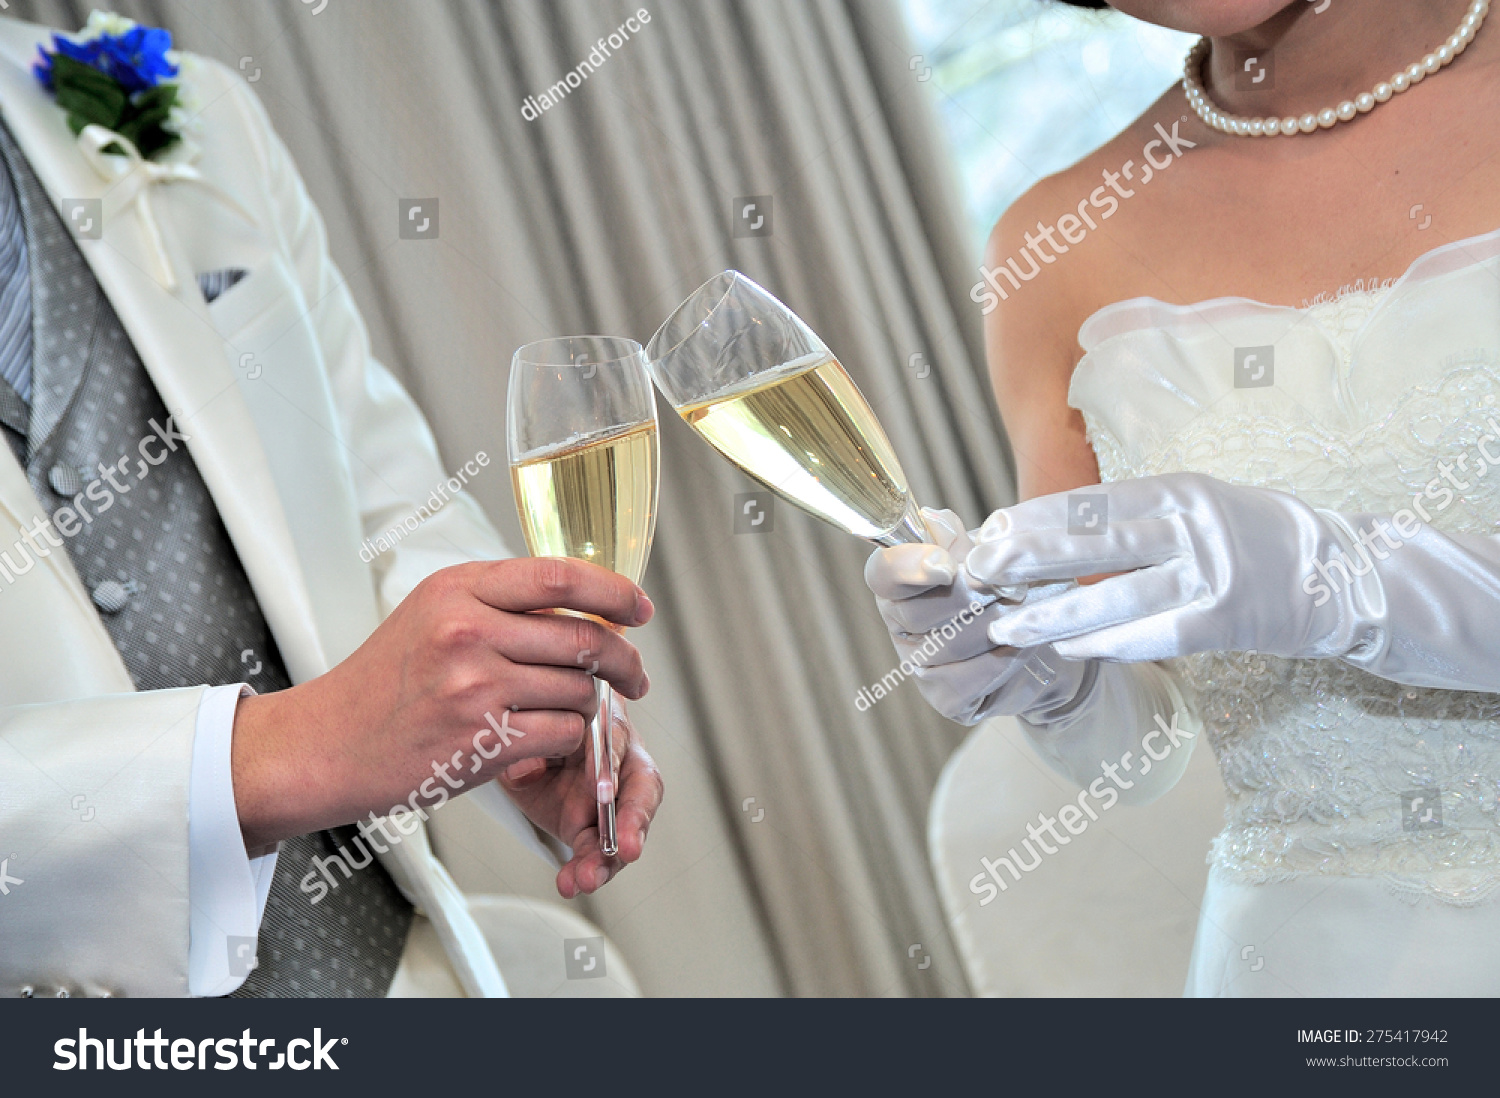 stock photo cheers bride at the wedding reception toast by the groom 275417942